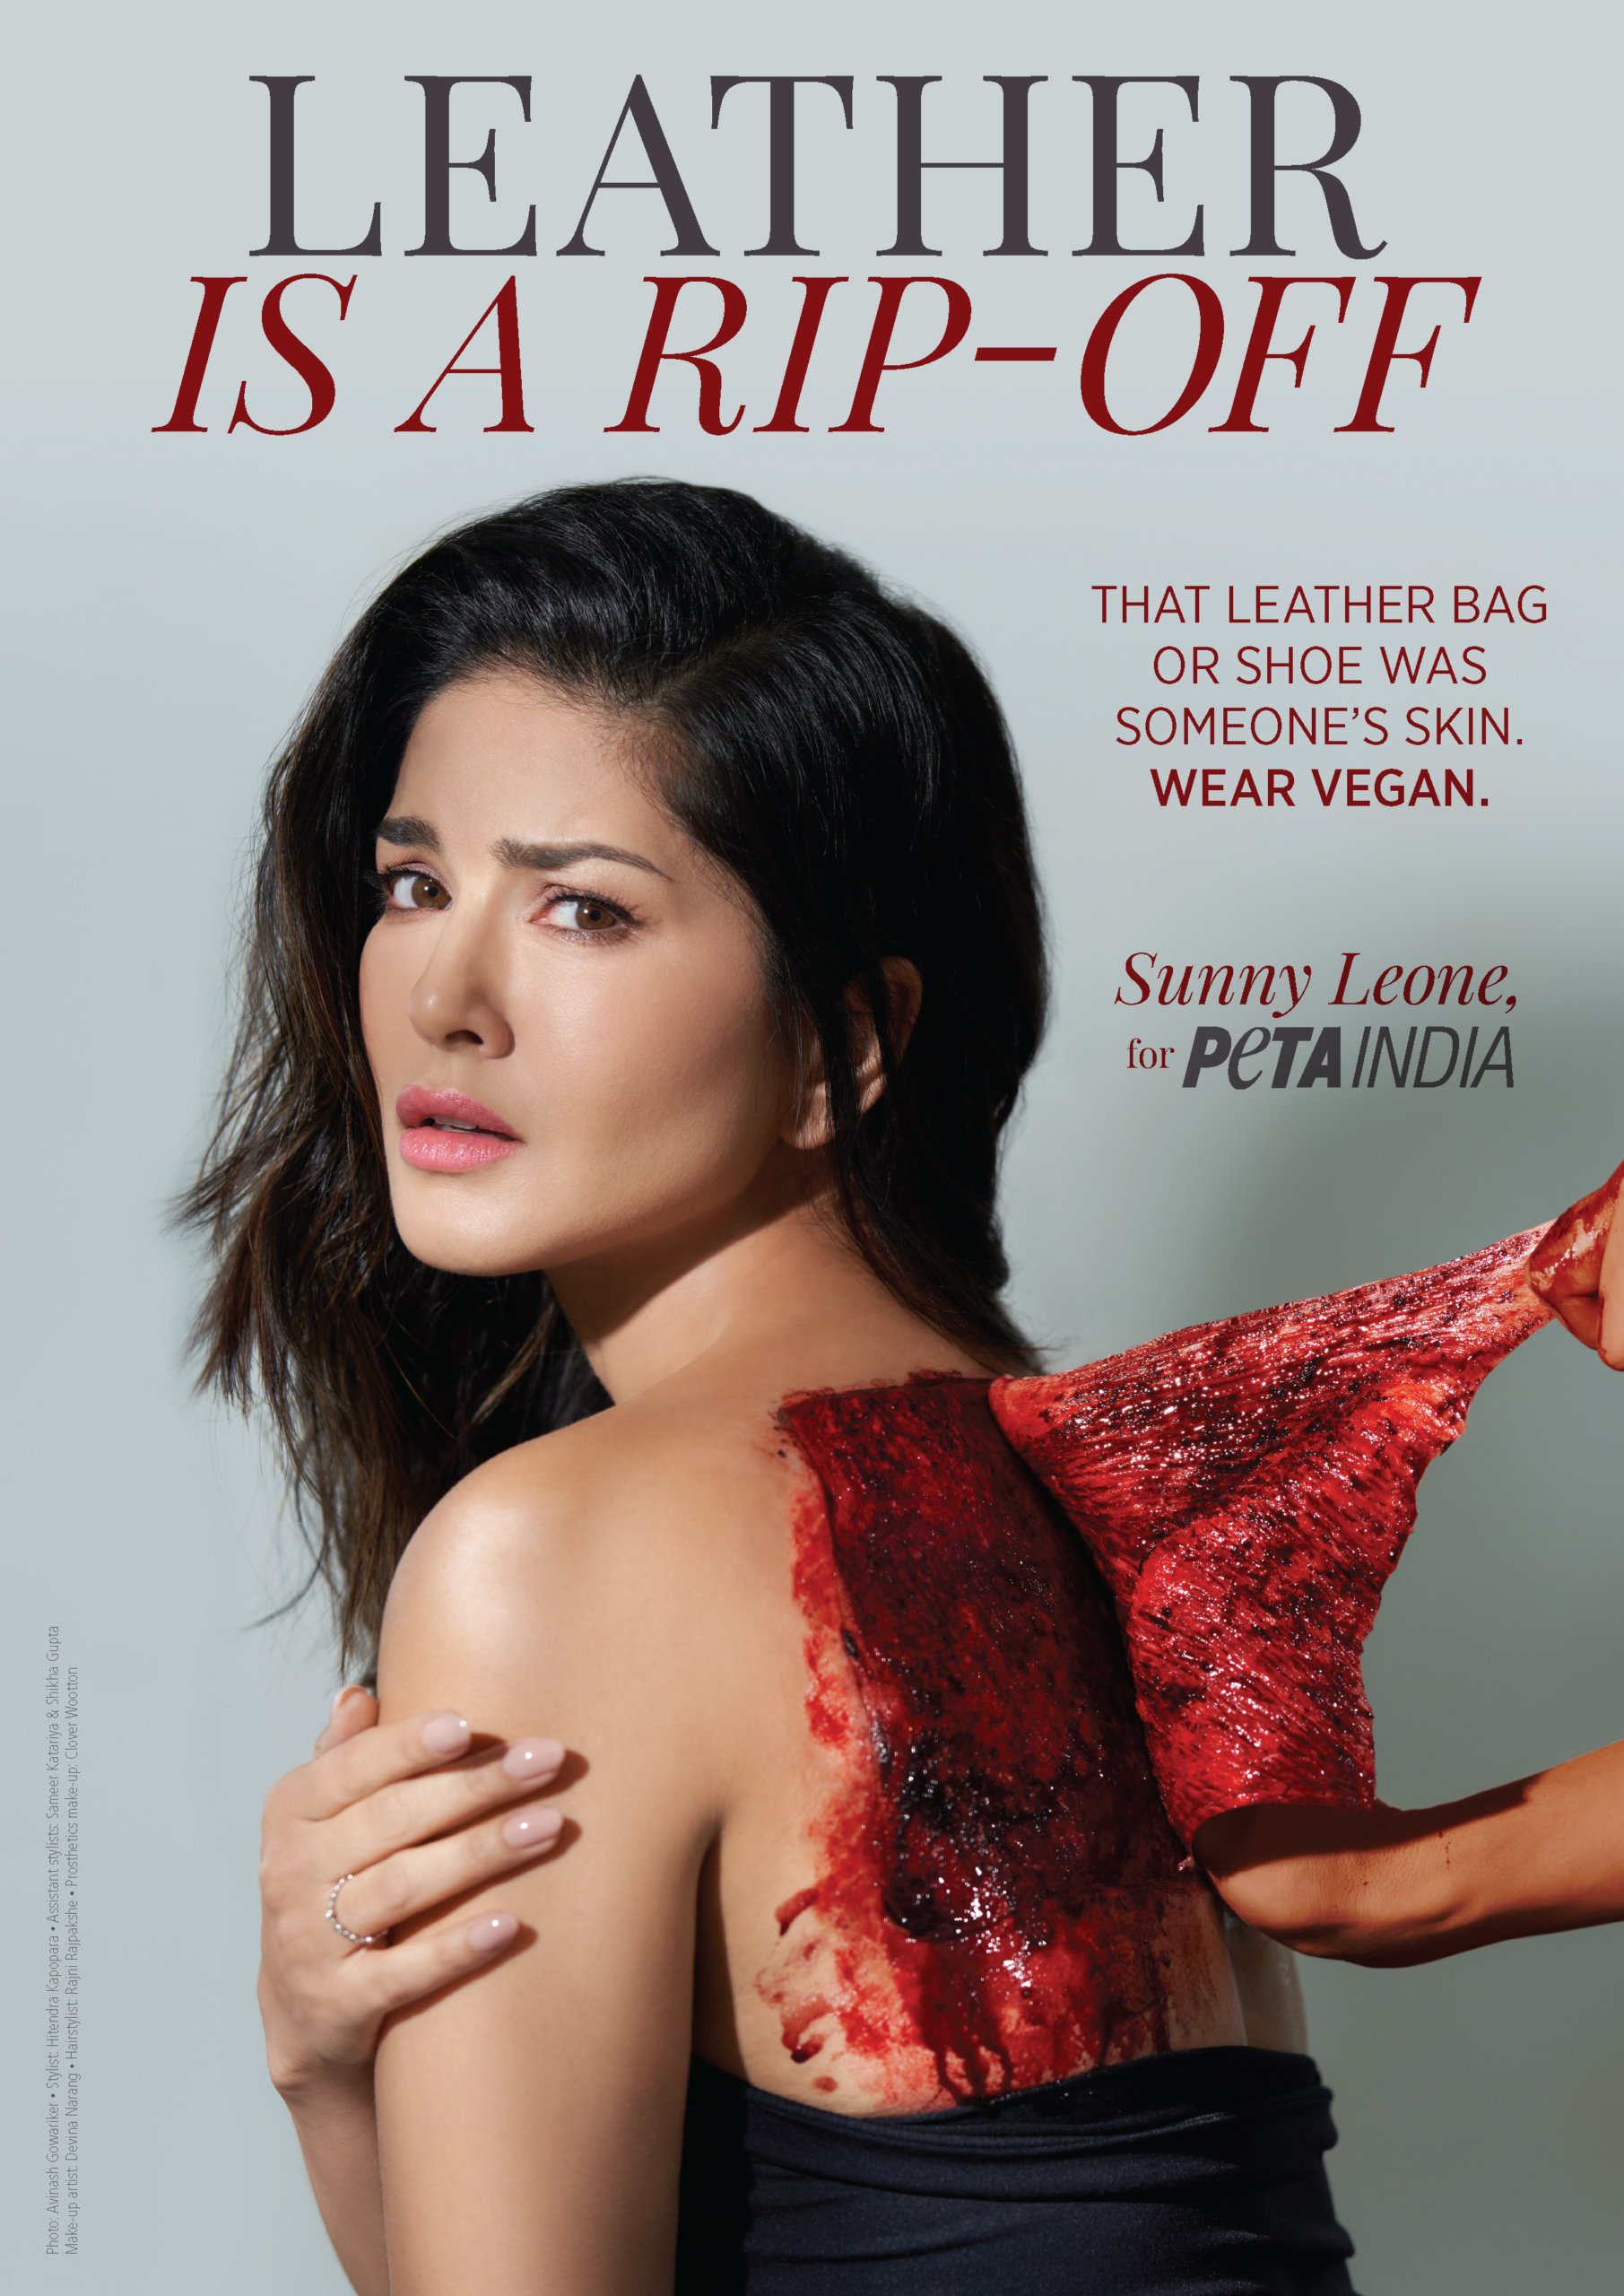 Sunny Leone Is ‘Skinned’ in New PETA India Ad Launched During Lakmé Fashion Week